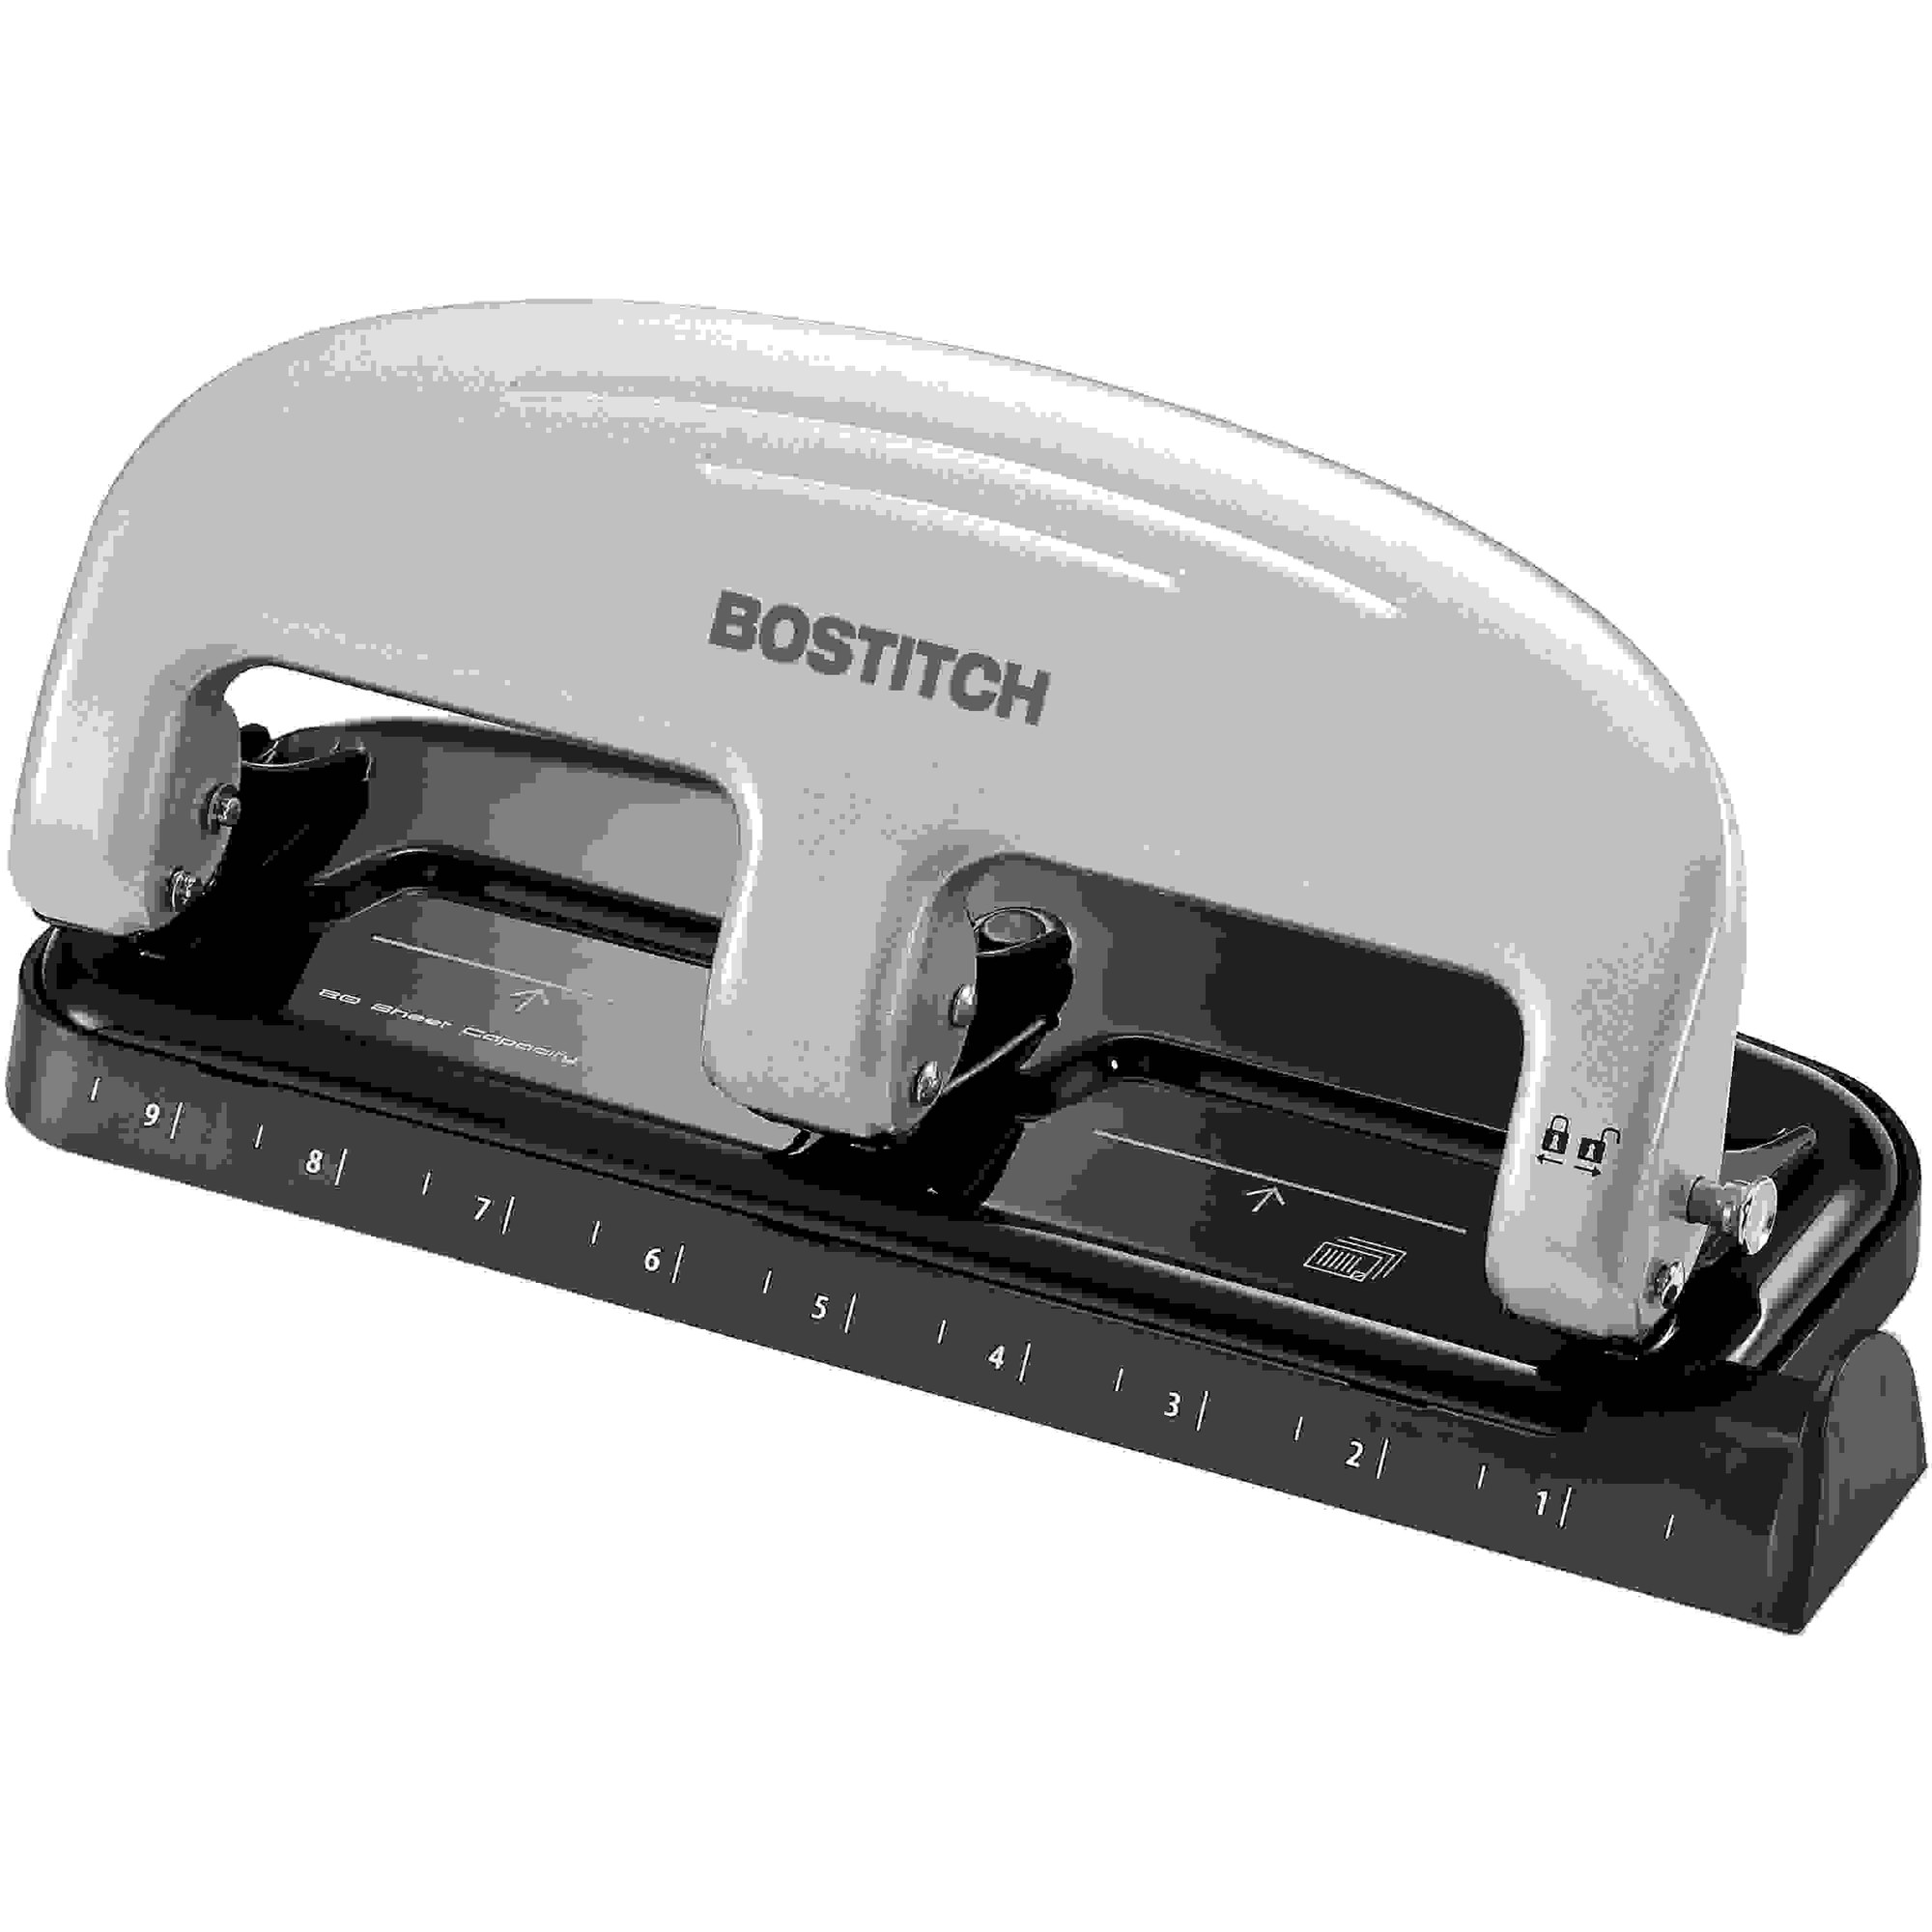 Bostitch EZ Squeeze 20 Three-Hole Punch - 3 Punch Head(s) - 20 Sheet - 9/32" Punch Size - 4.4" x 2" - Black, Silver